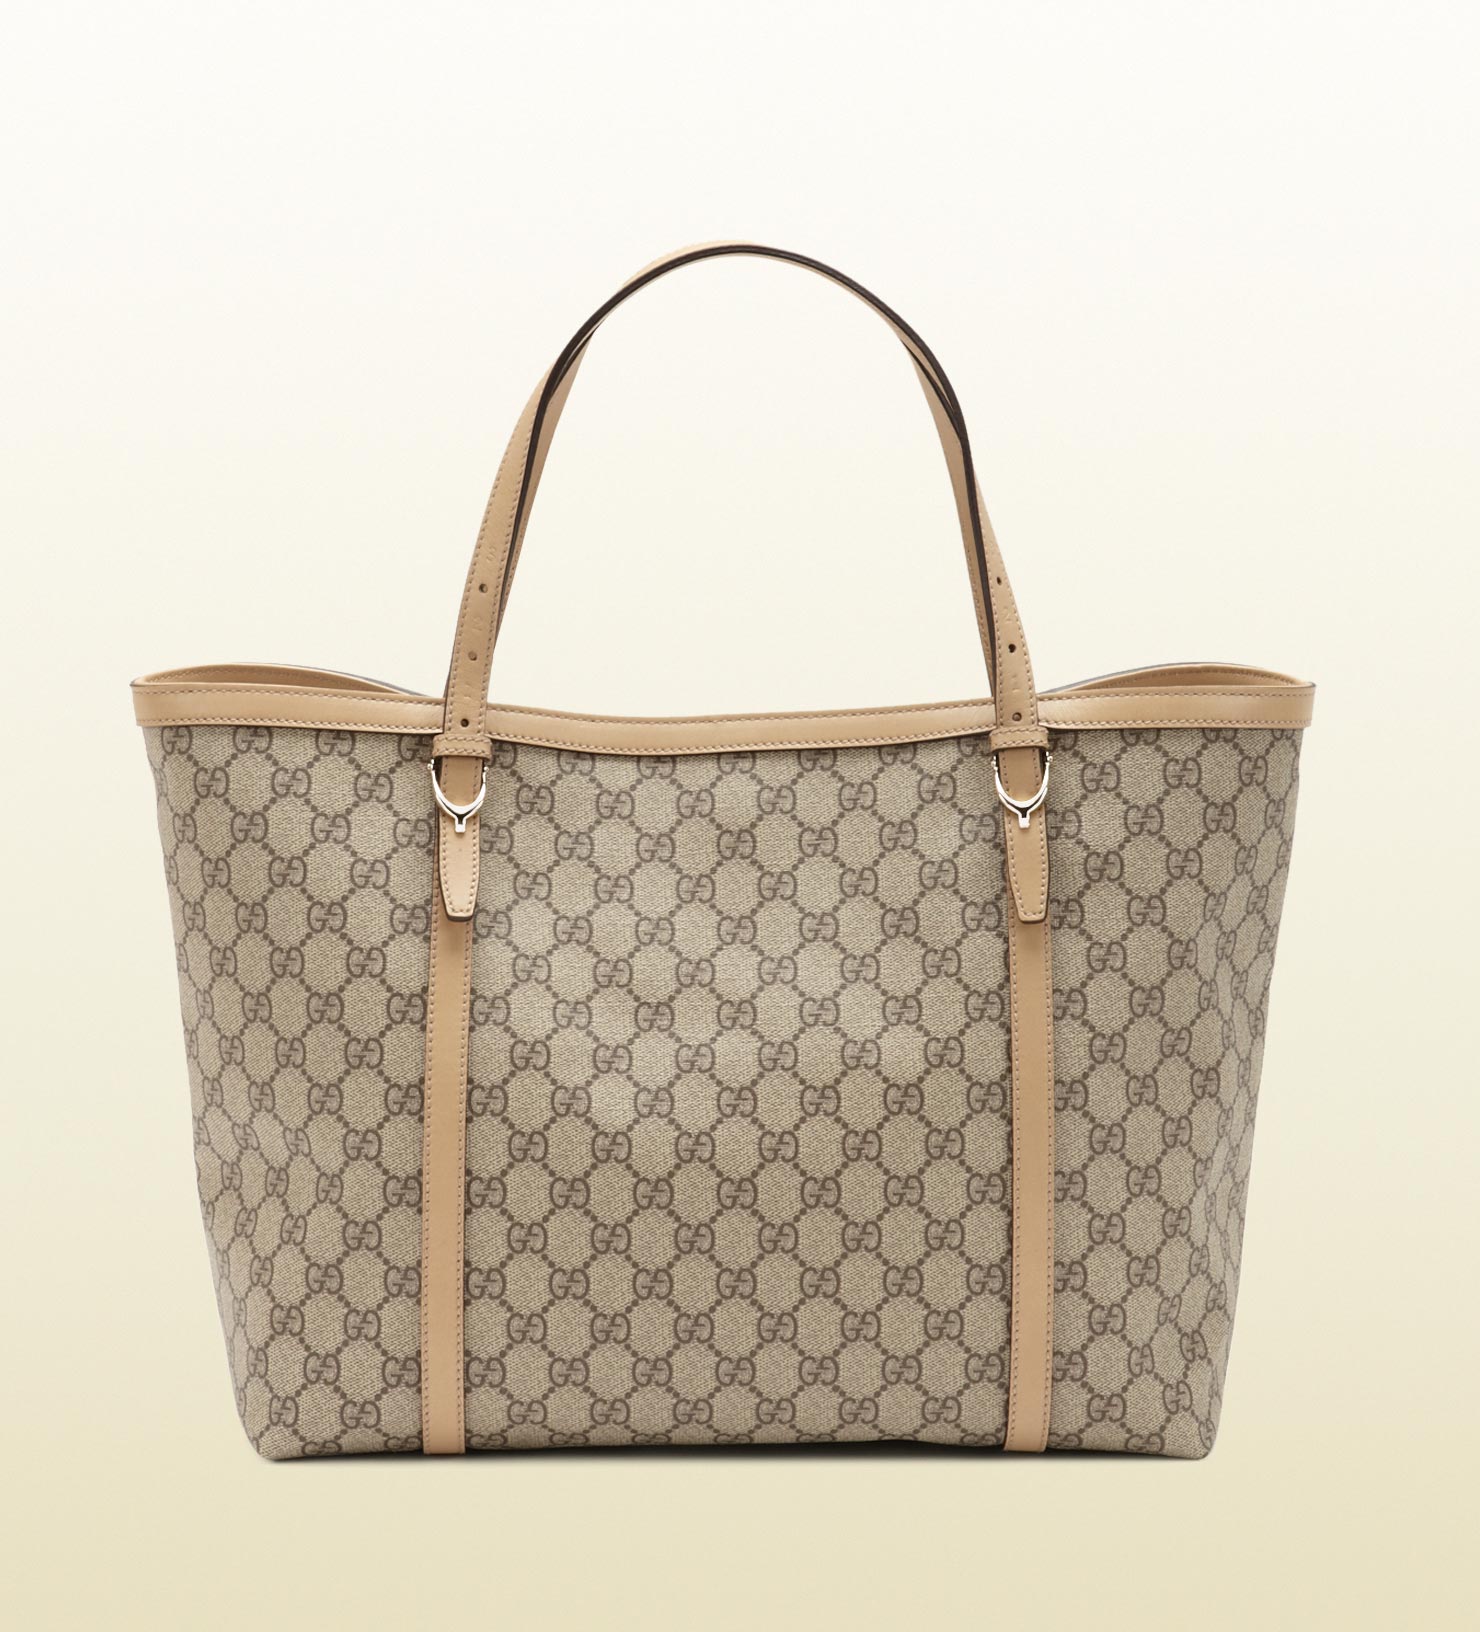 Gucci Nice Gg Supreme Canvas Tote in Beige (Brown) - Lyst